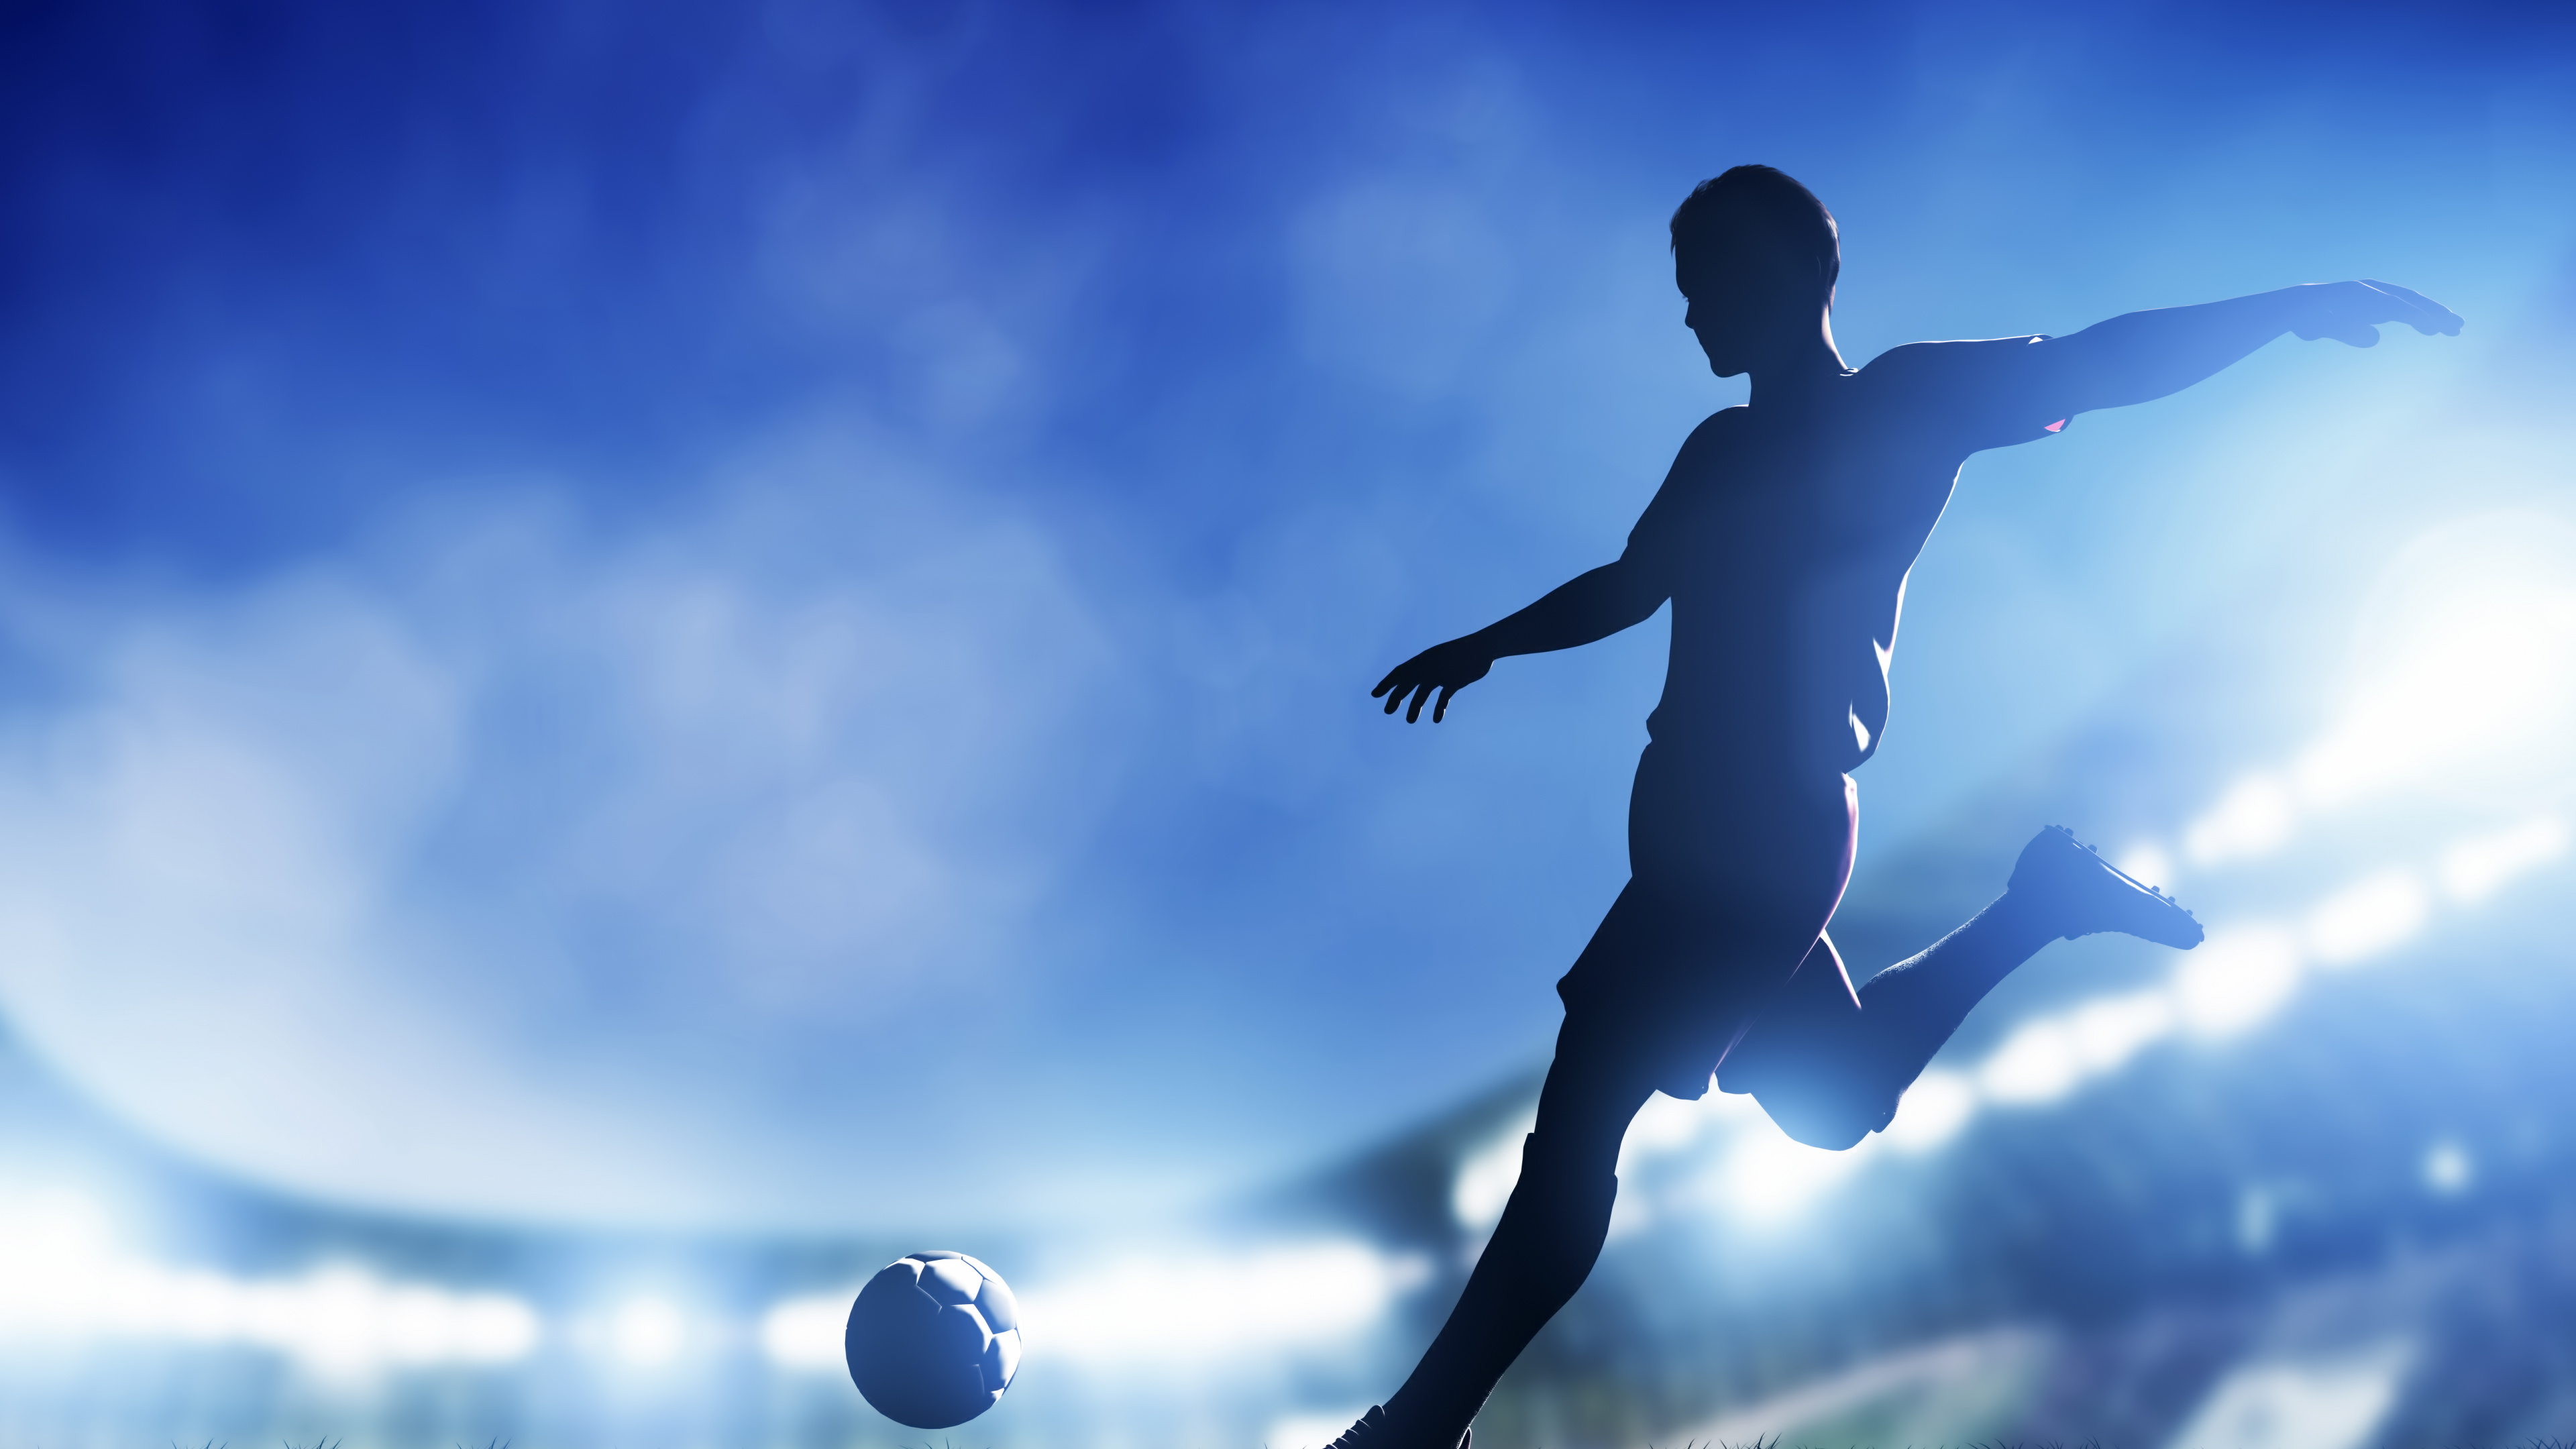 Man in Black Shorts Playing Soccer Ball. Wallpaper in 3840x2160 Resolution